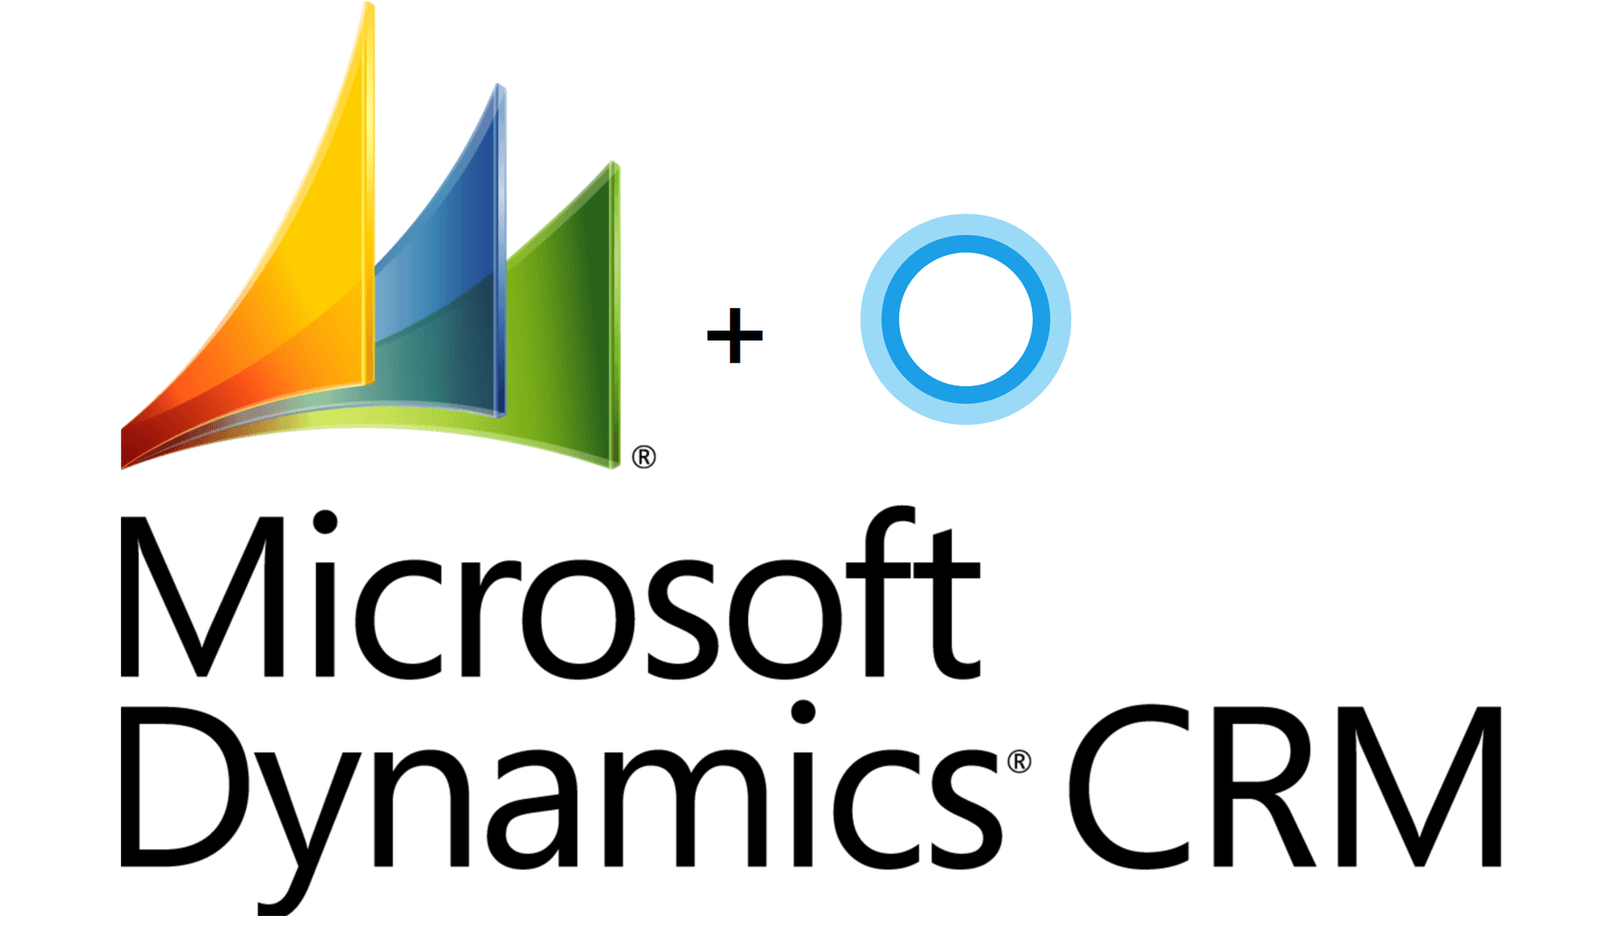 Dynamics CRM Logo - Microsoft adds Dynamics CRM support to Cortana through Connected